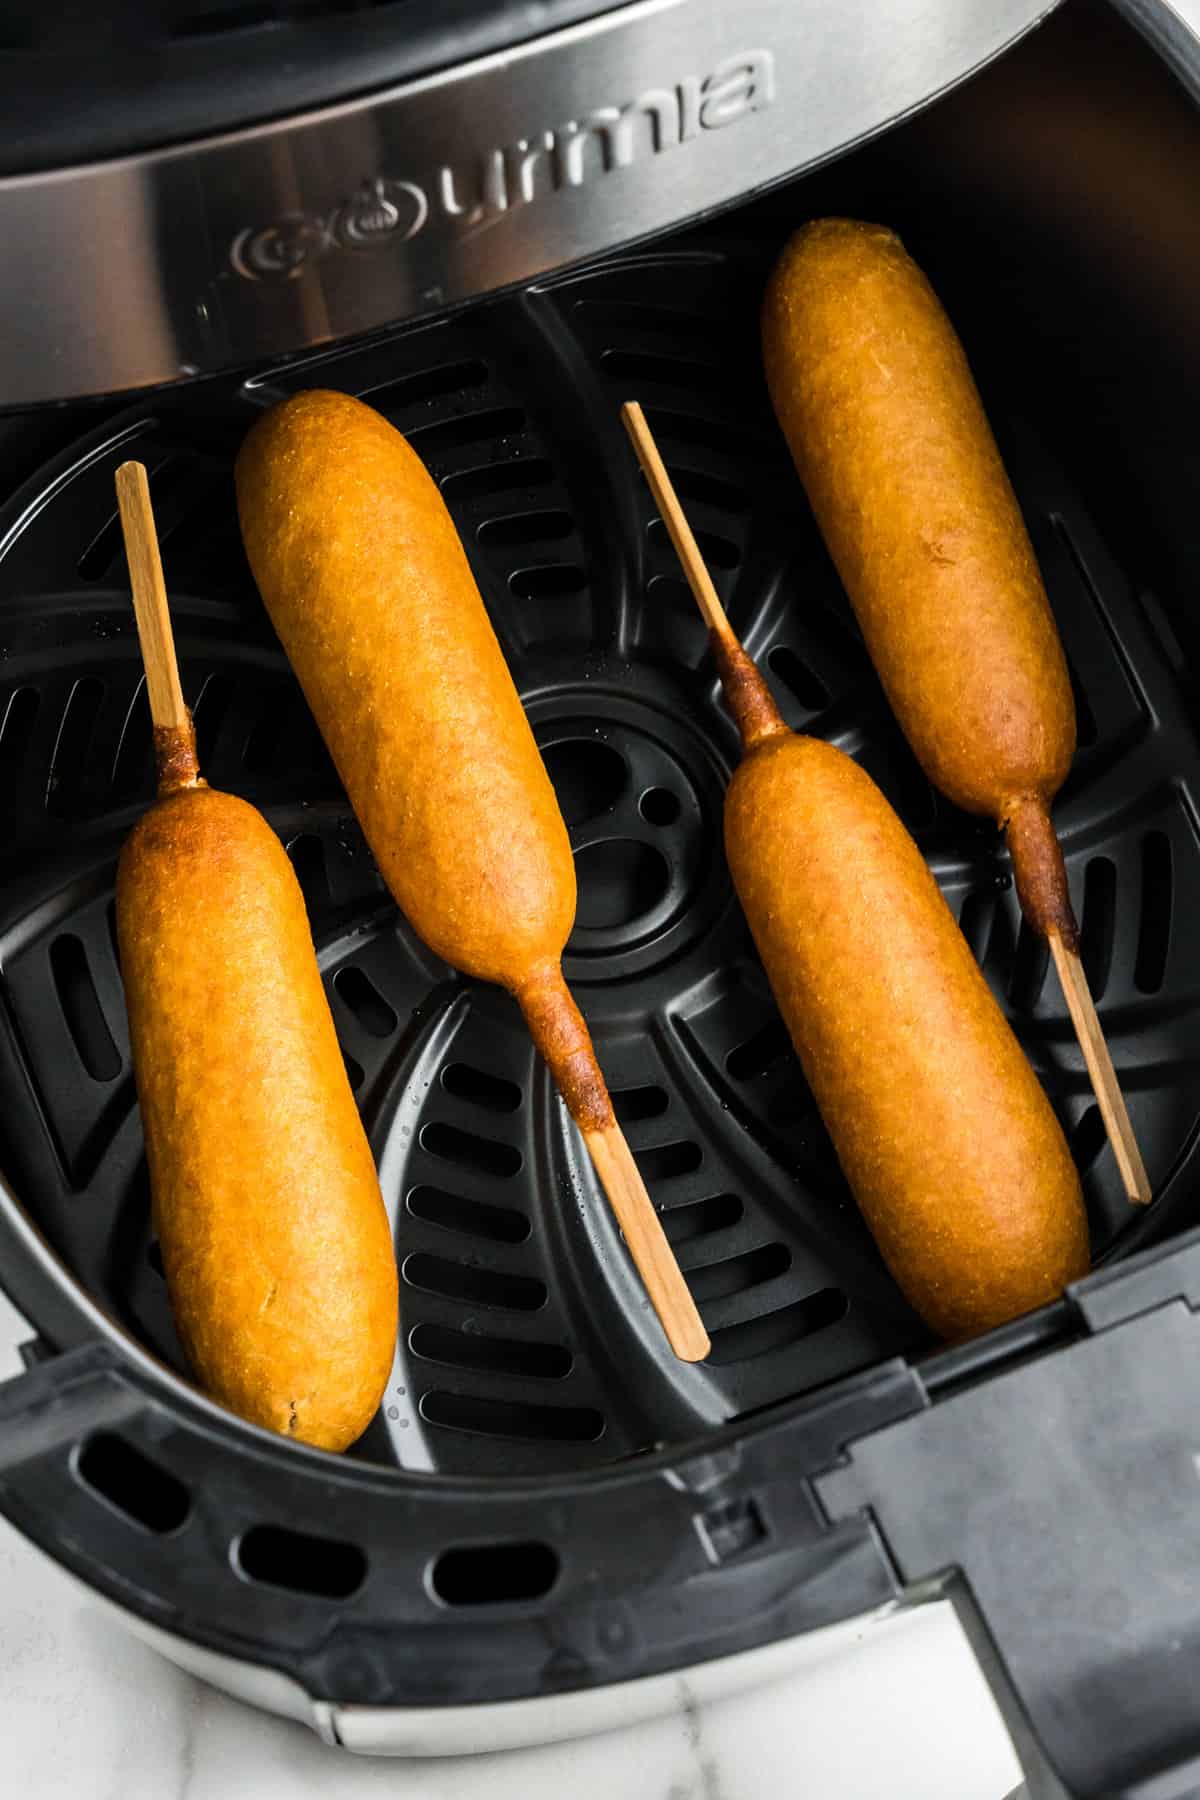 Air fryer basket with corn dogs in it